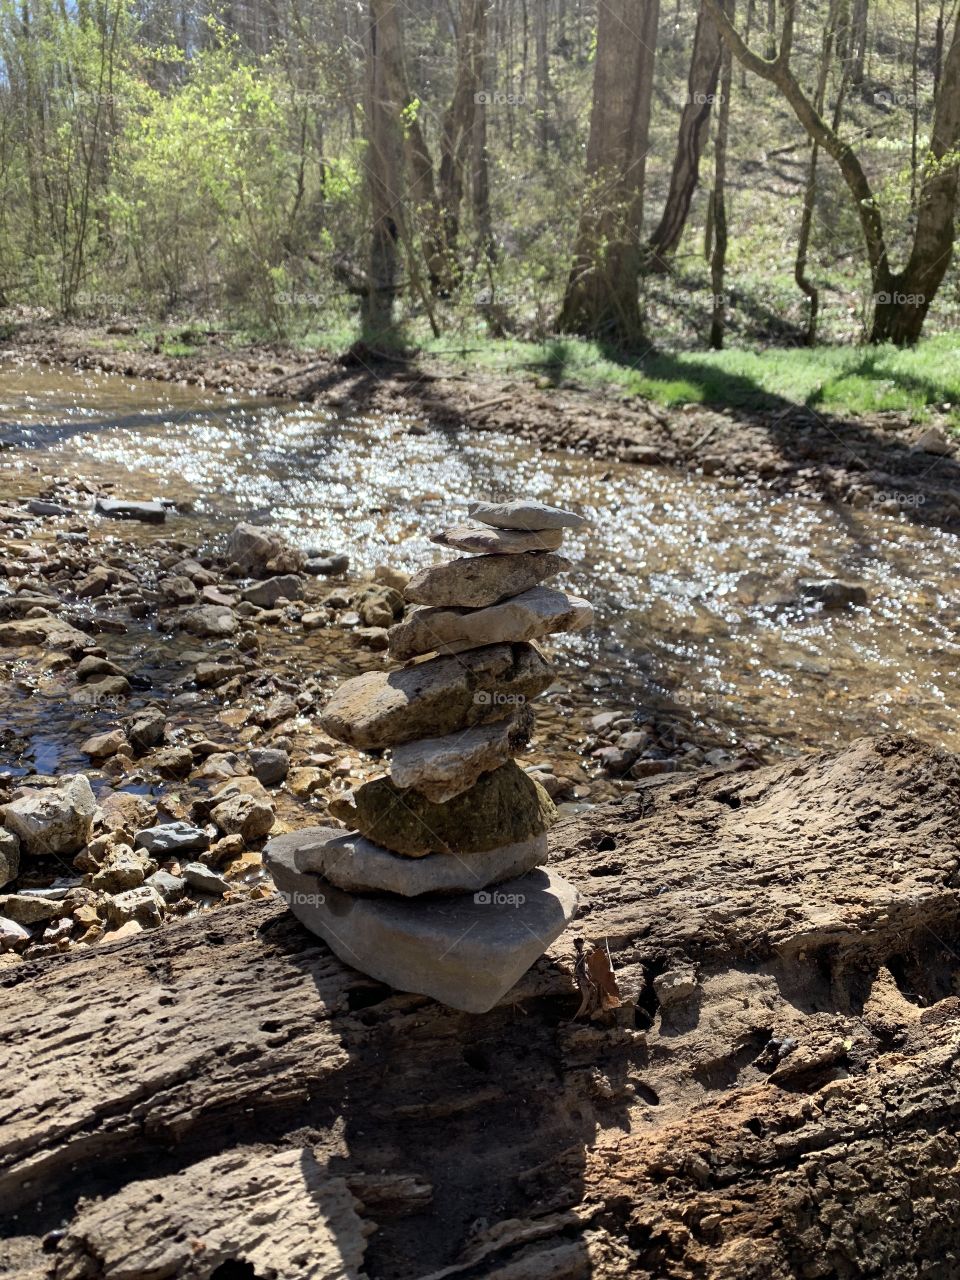 Stacking Stones by the Creek